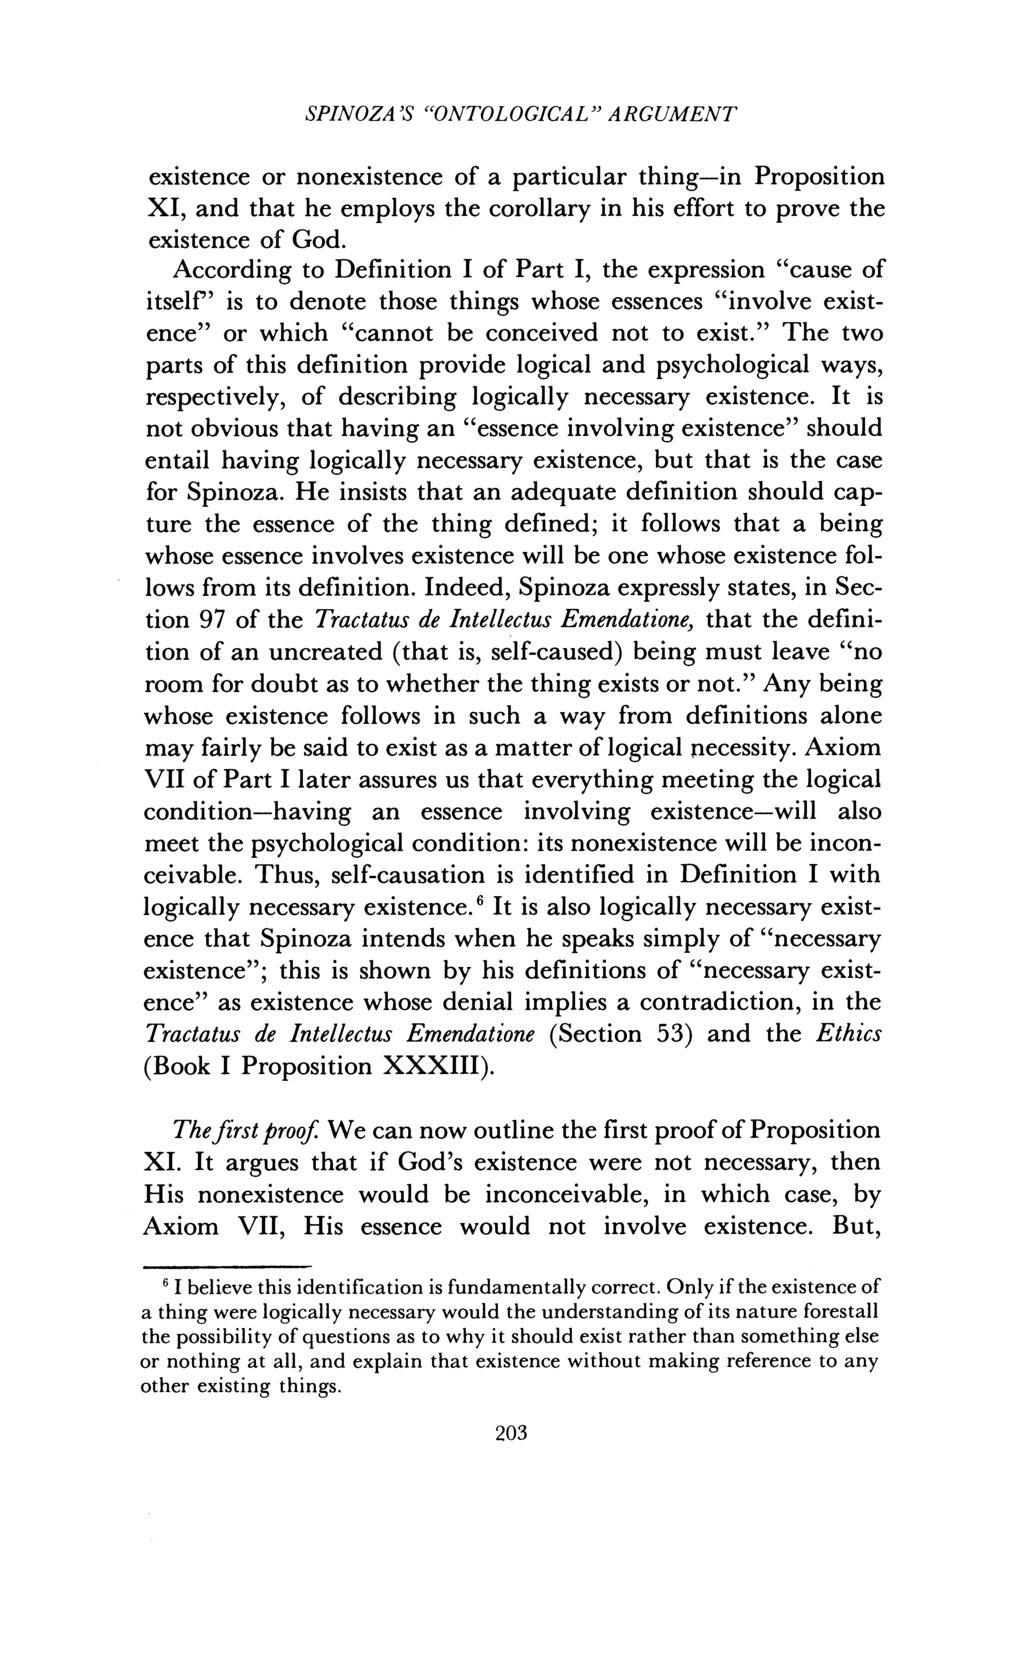 SPINOZA'S "ONTOLOGICAL" ARGUMENT existence or nonexistence of a particular thing-in Proposition XI, and that he employs the corollary in his effort to prove the existence of God.